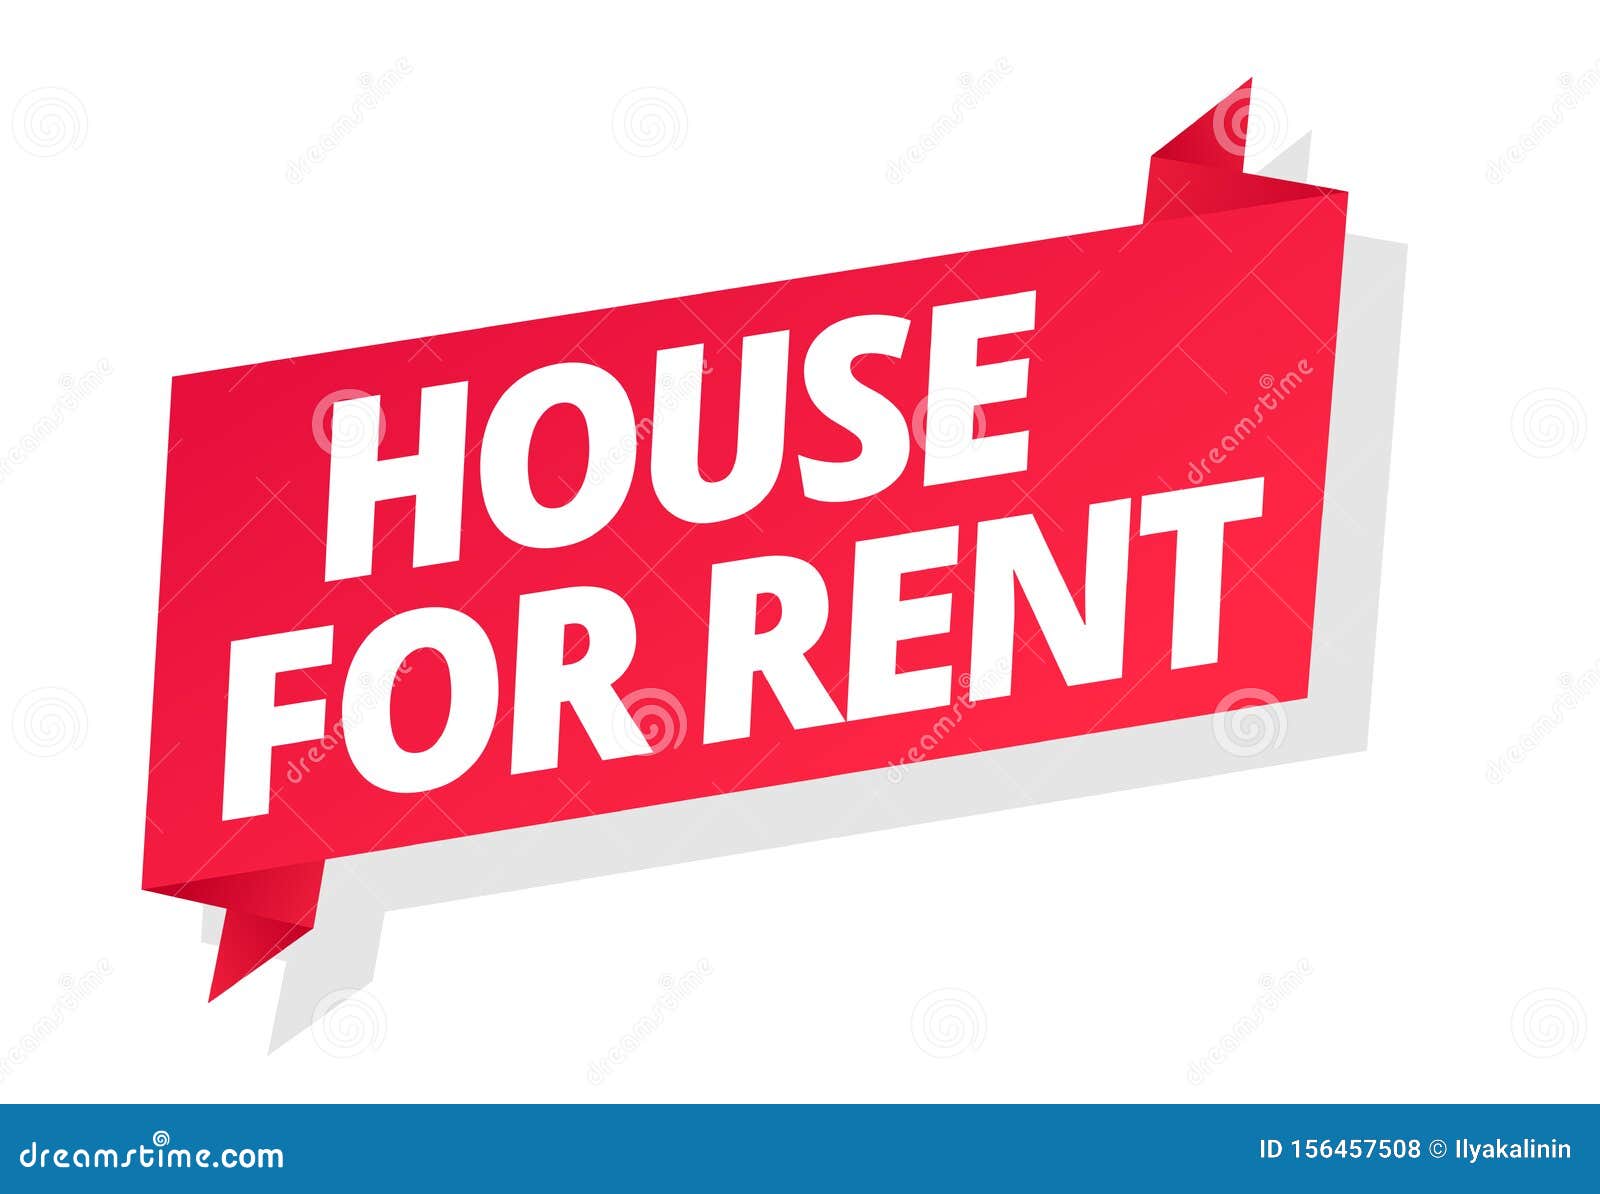 Houses For Rent Near Me